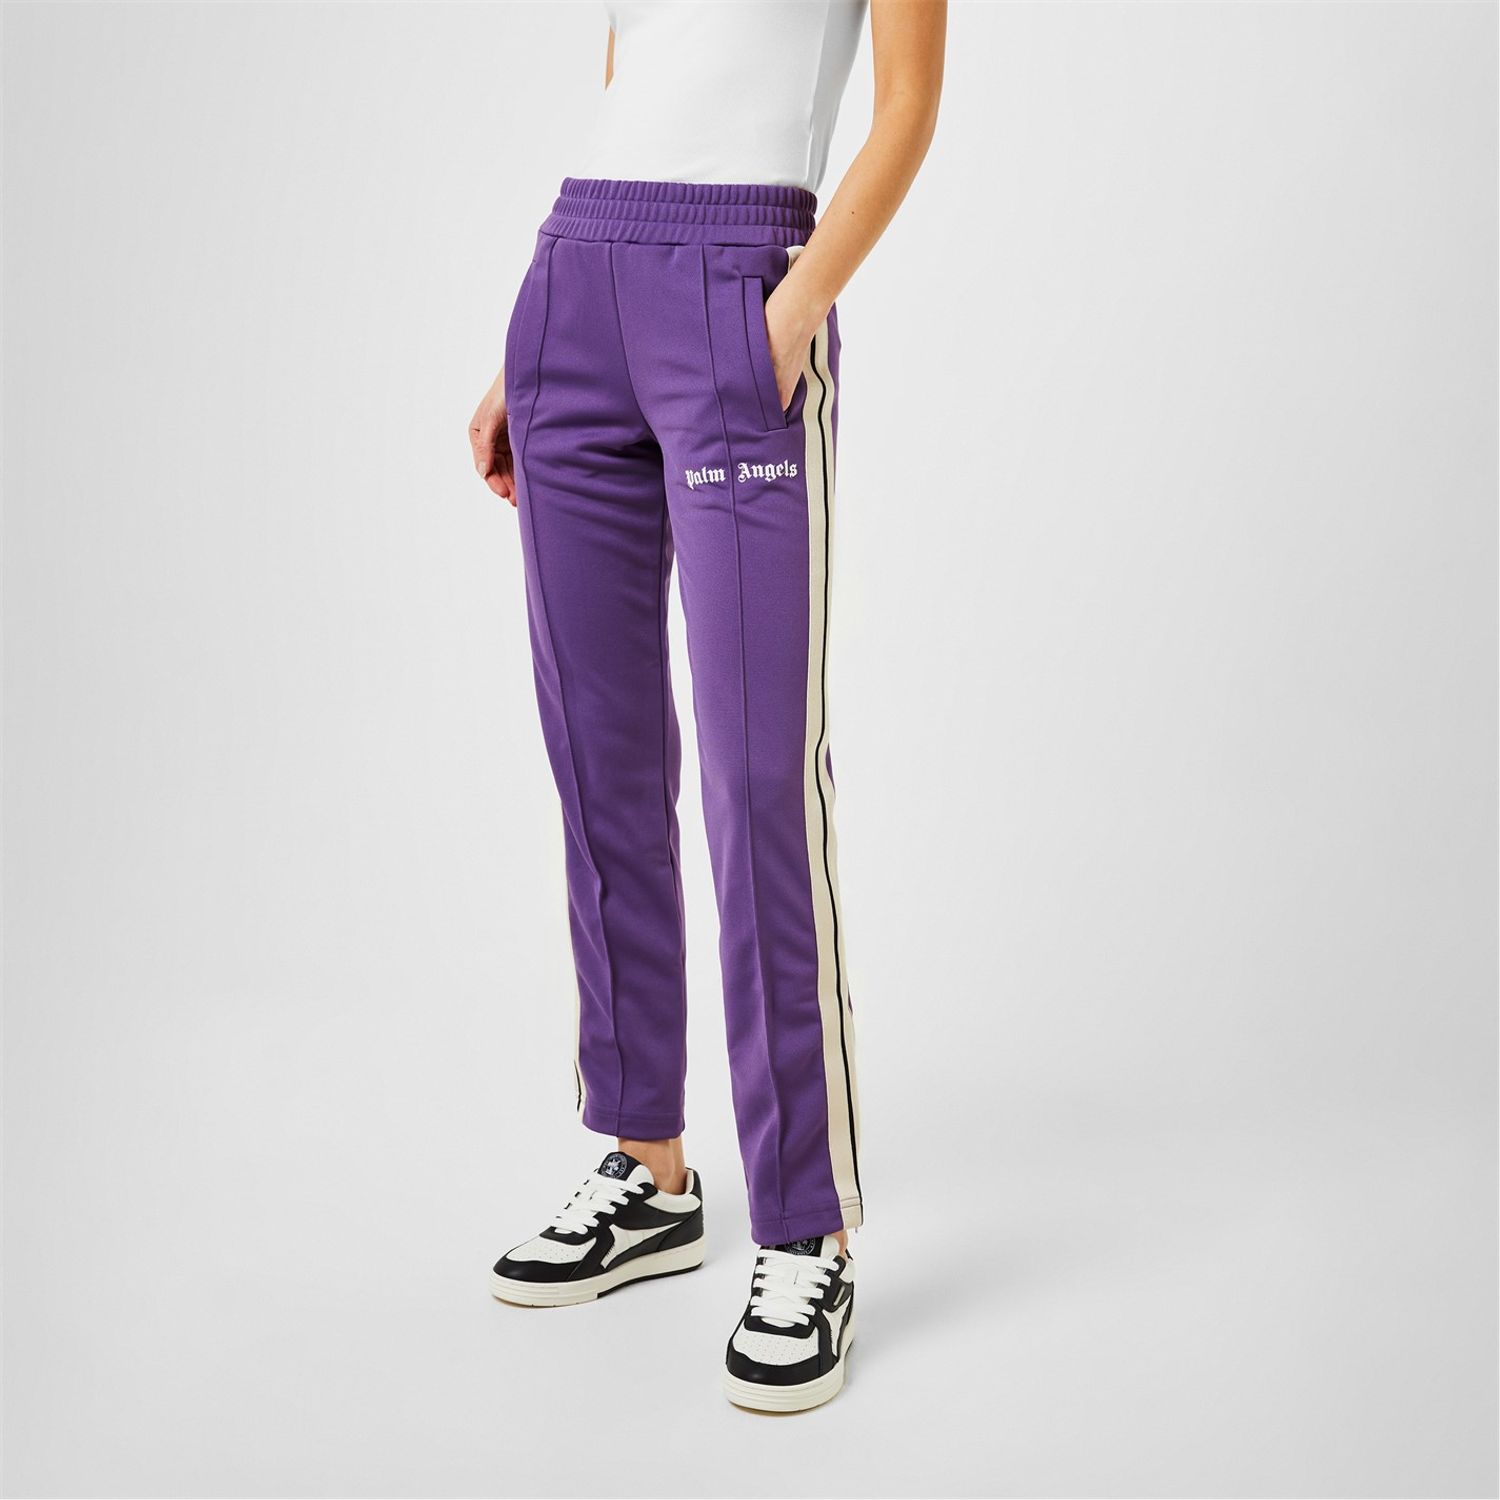 PURPLE TRACK PANTS in purple - Palm Angels® Official